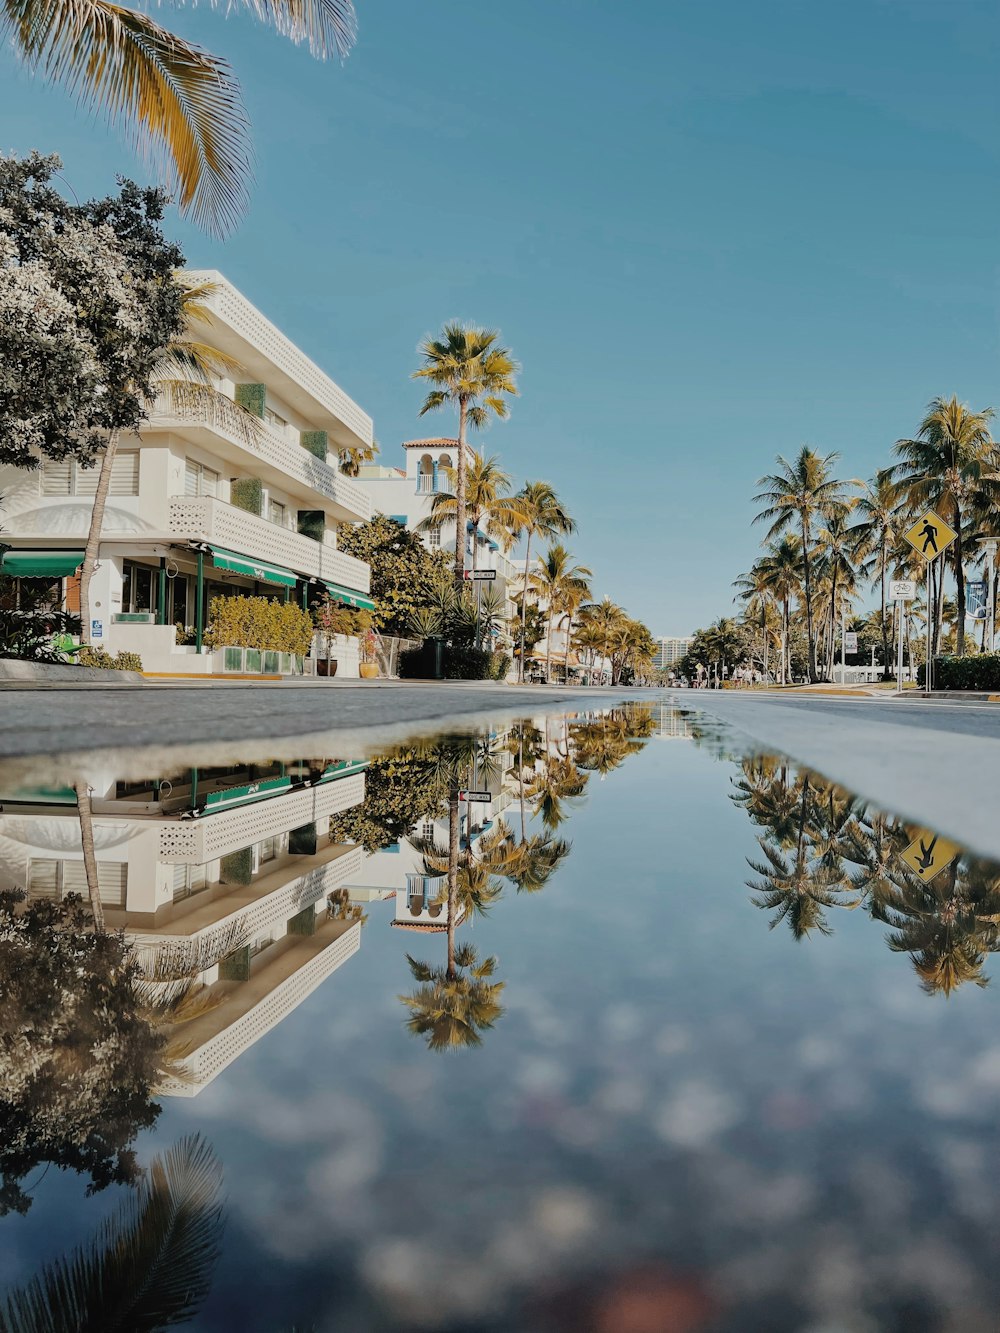 a reflection of palm trees in a pool of water